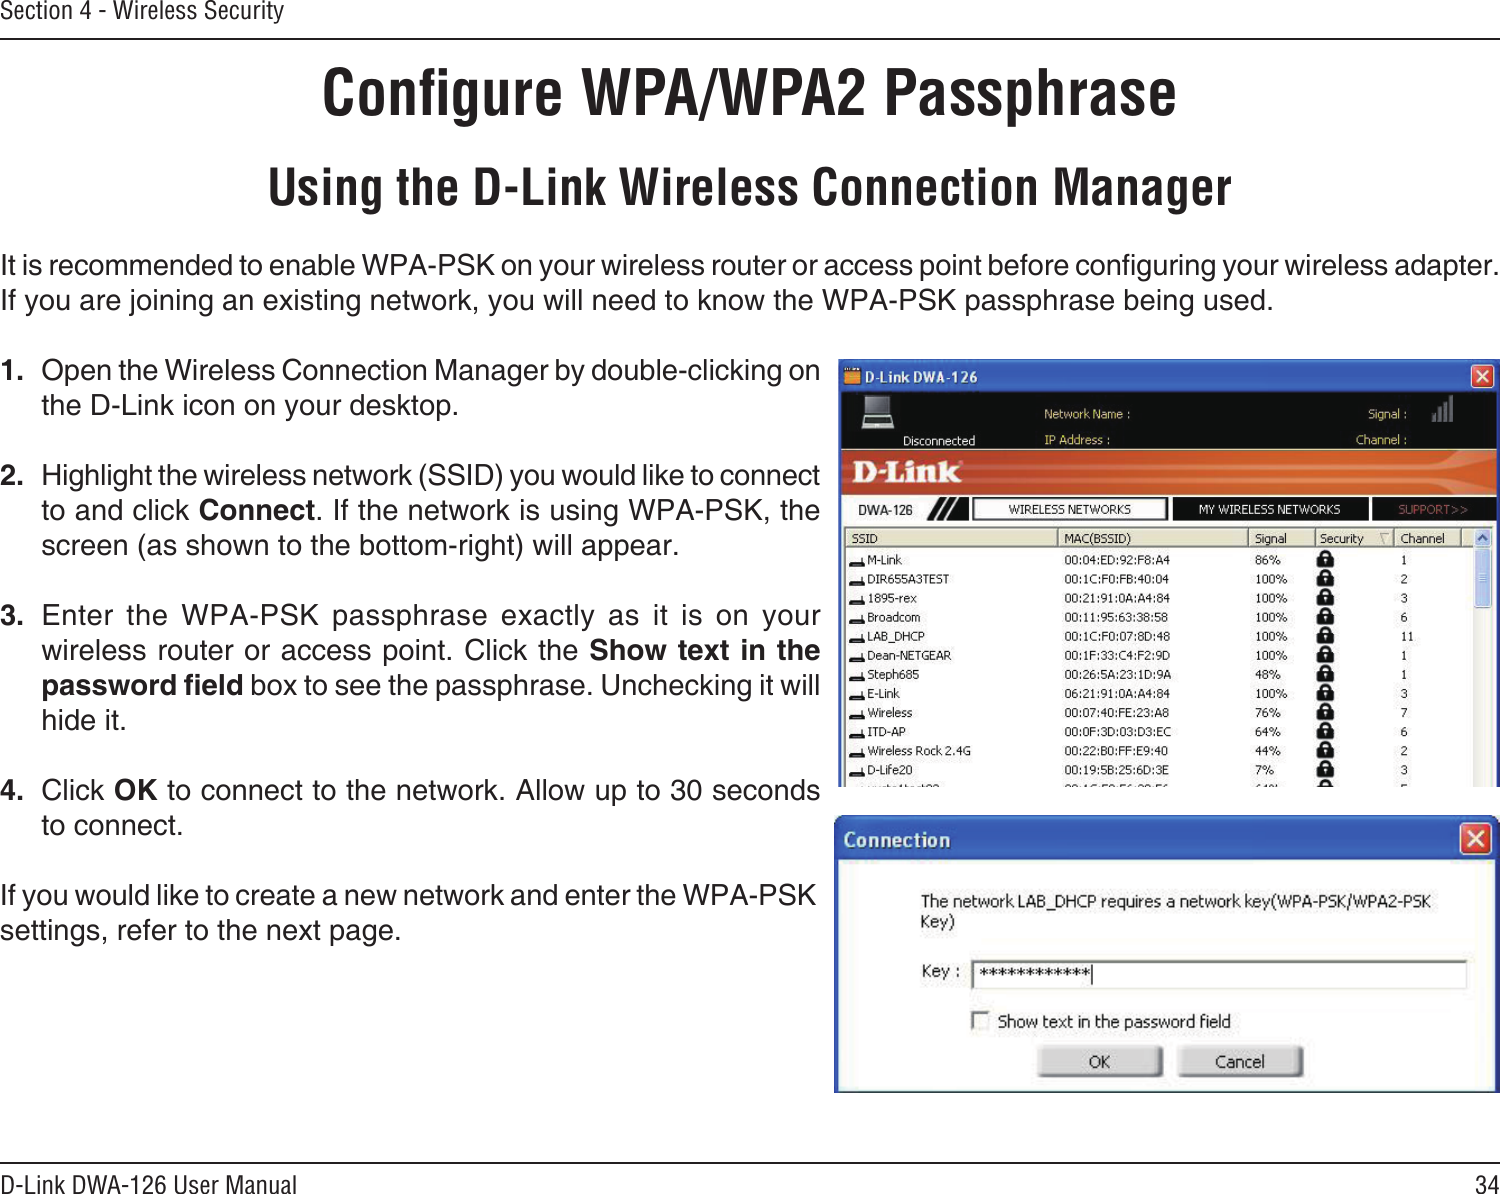 34D-Link DWA-126 User ManualSection 4 - Wireless SecurityConﬁgure WPA/WPA2 PassphraseUsing the D-Link Wireless Connection ManagerIt is recommended to enable WPA-PSK on your wireless router or access point before conguring your wireless adapter. If you are joining an existing network, you will need to know the WPA-PSK passphrase being used.1.  Open the Wireless Connection Manager by double-clicking on the D-Link icon on your desktop. 2.  Highlight the wireless network (SSID) you would like to connect to and click Connect. If the network is using WPA-PSK, the screen (as shown to the bottom-right) will appear. 3.  Enter  the  WPA-PSK  passphrase  exactly  as  it  is  on  your wireless router or access point. Click the Show text in the password eld box to see the passphrase. Unchecking it will hide it.4.  Click OK to connect to the network. Allow up to 30 seconds to connect.If you would like to create a new network and enter the WPA-PSK settings, refer to the next page.